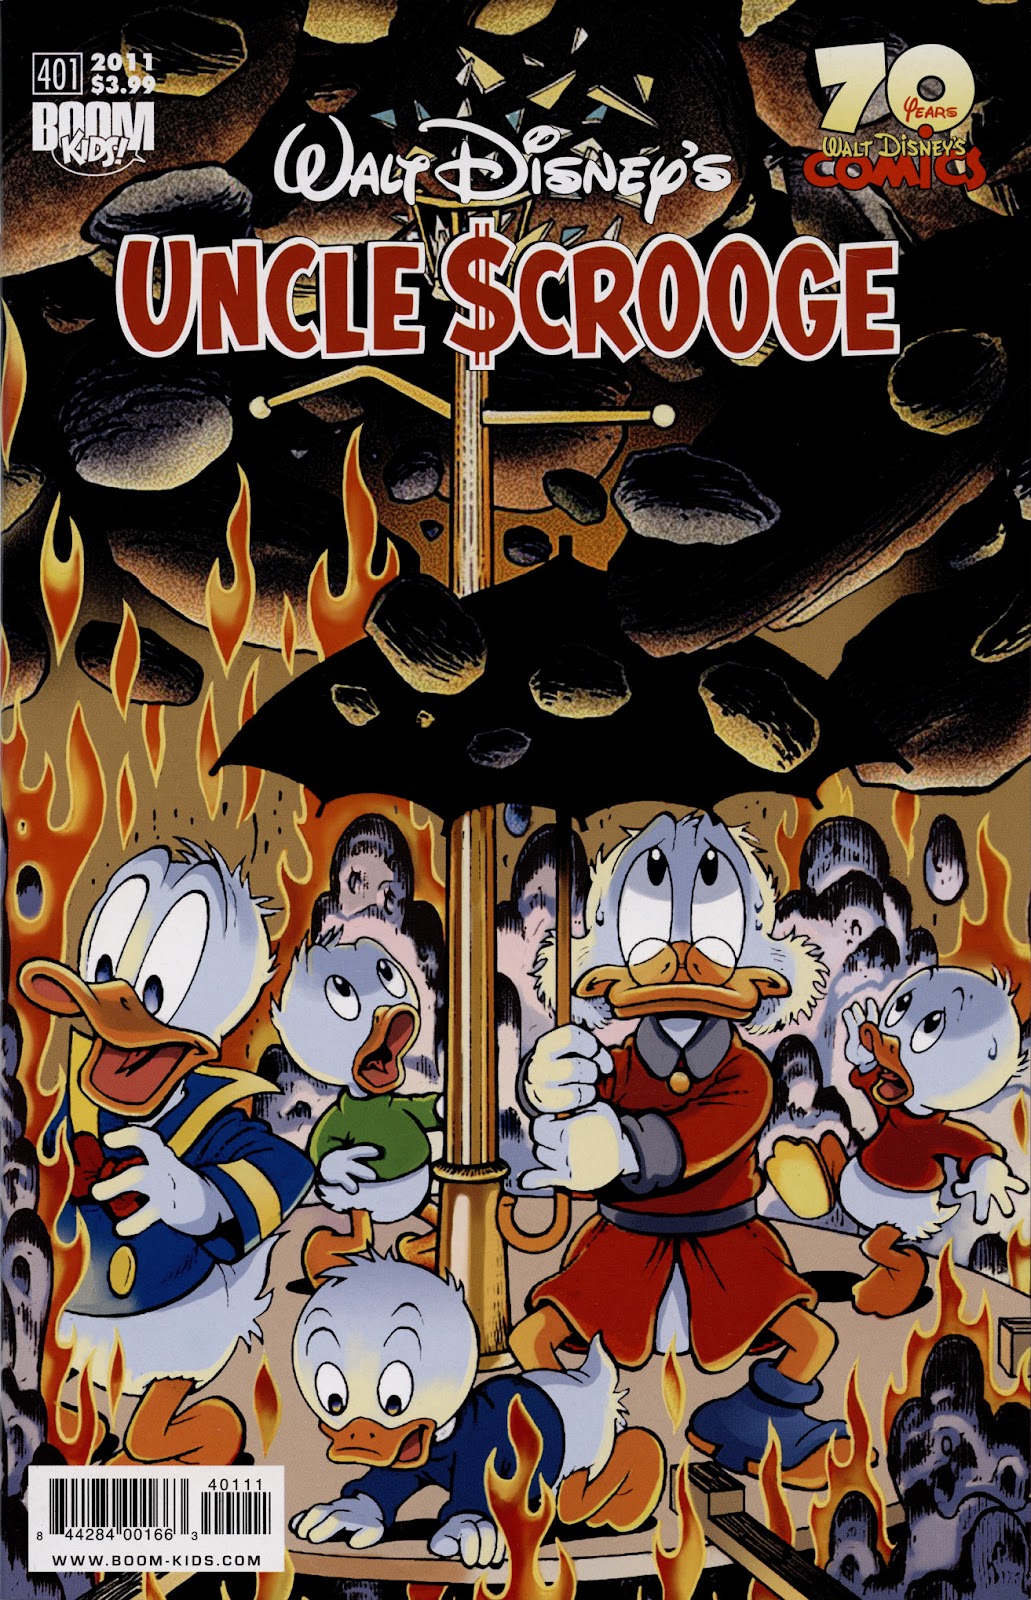 Uncle Scrooge (1953) issue 401 - Page 1